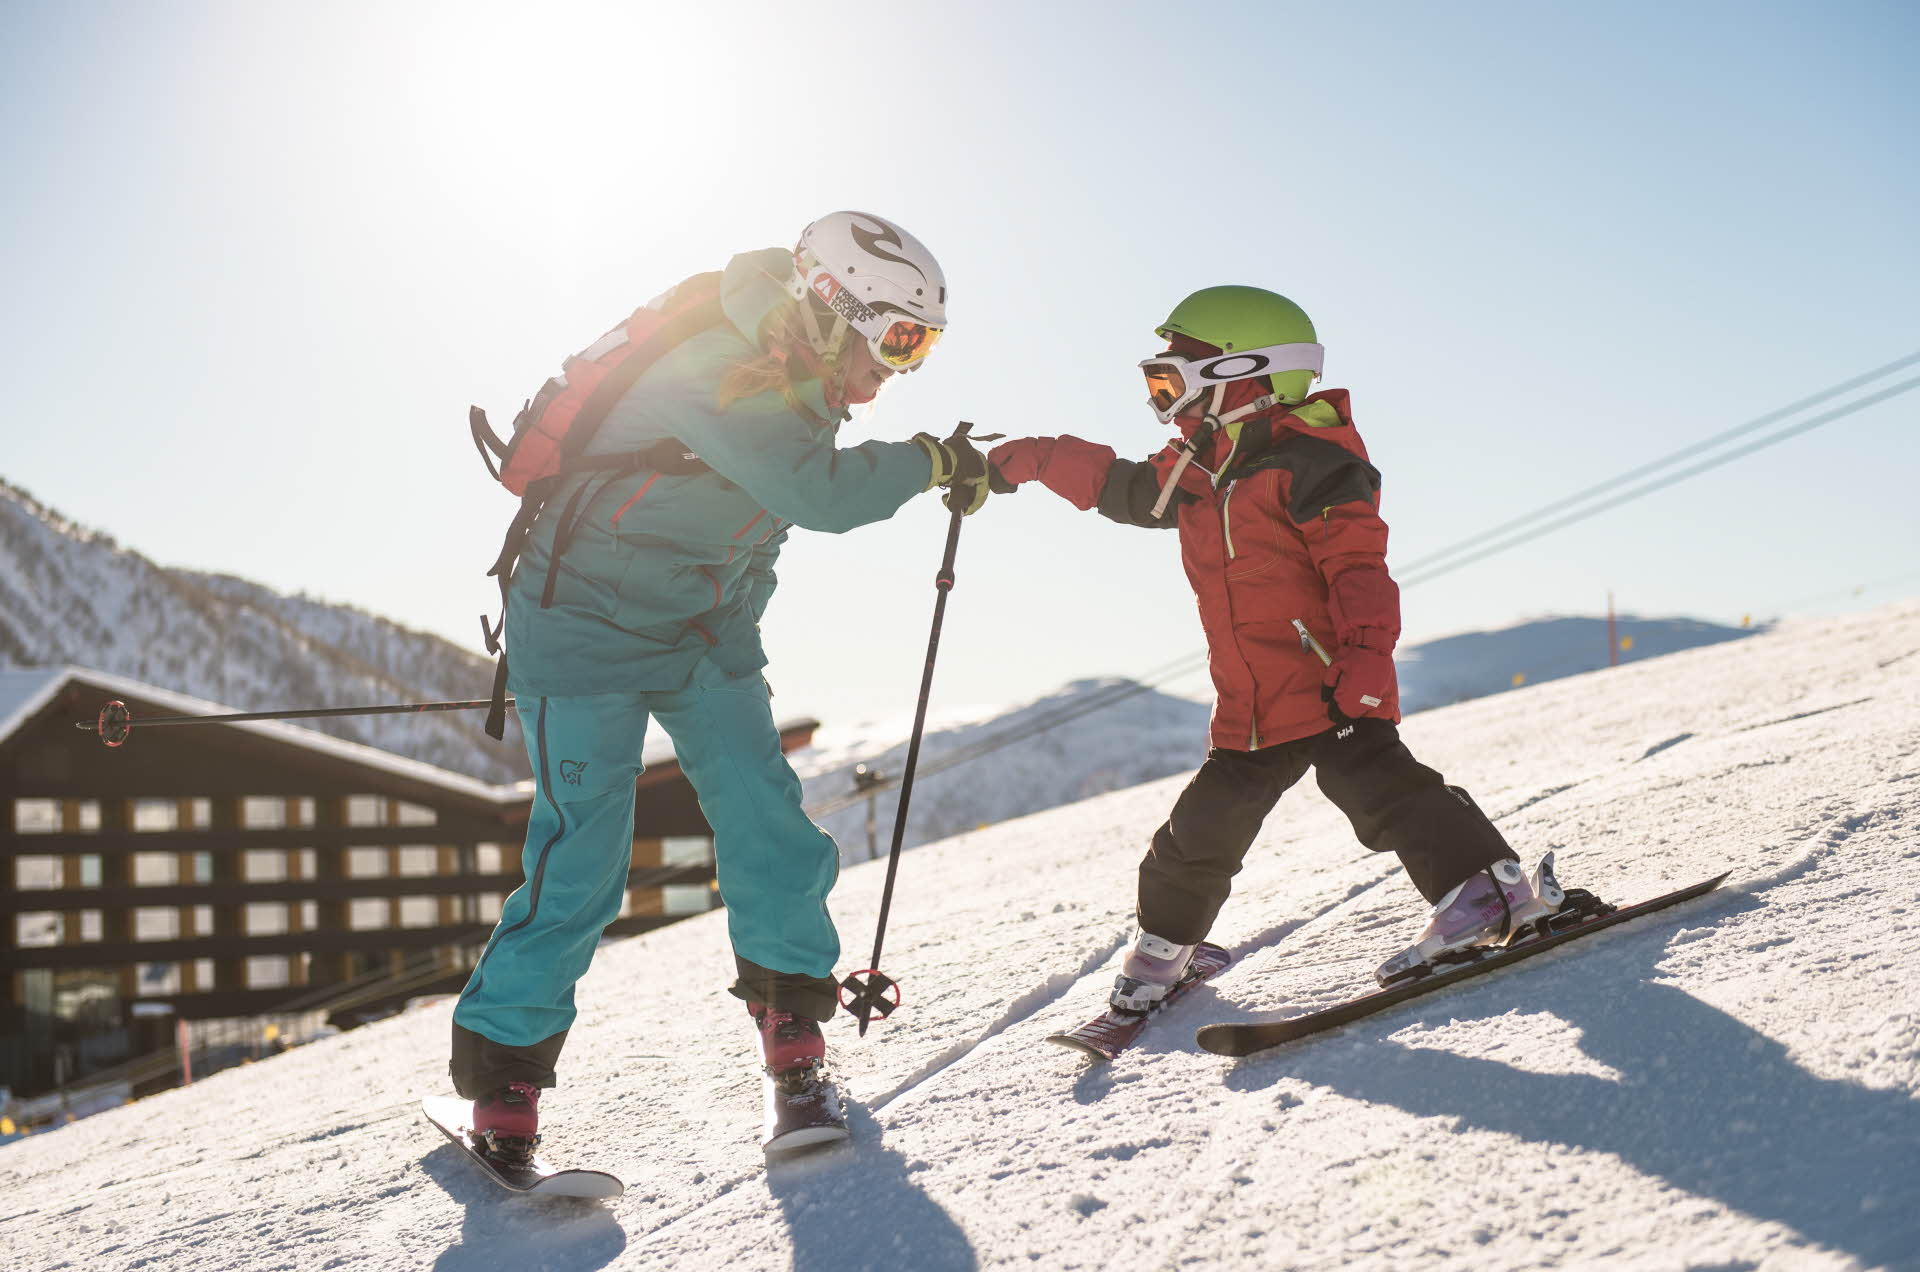 An adult and a kid fist bumping on the ski slopes. Myrkdalen Hotel in the background.